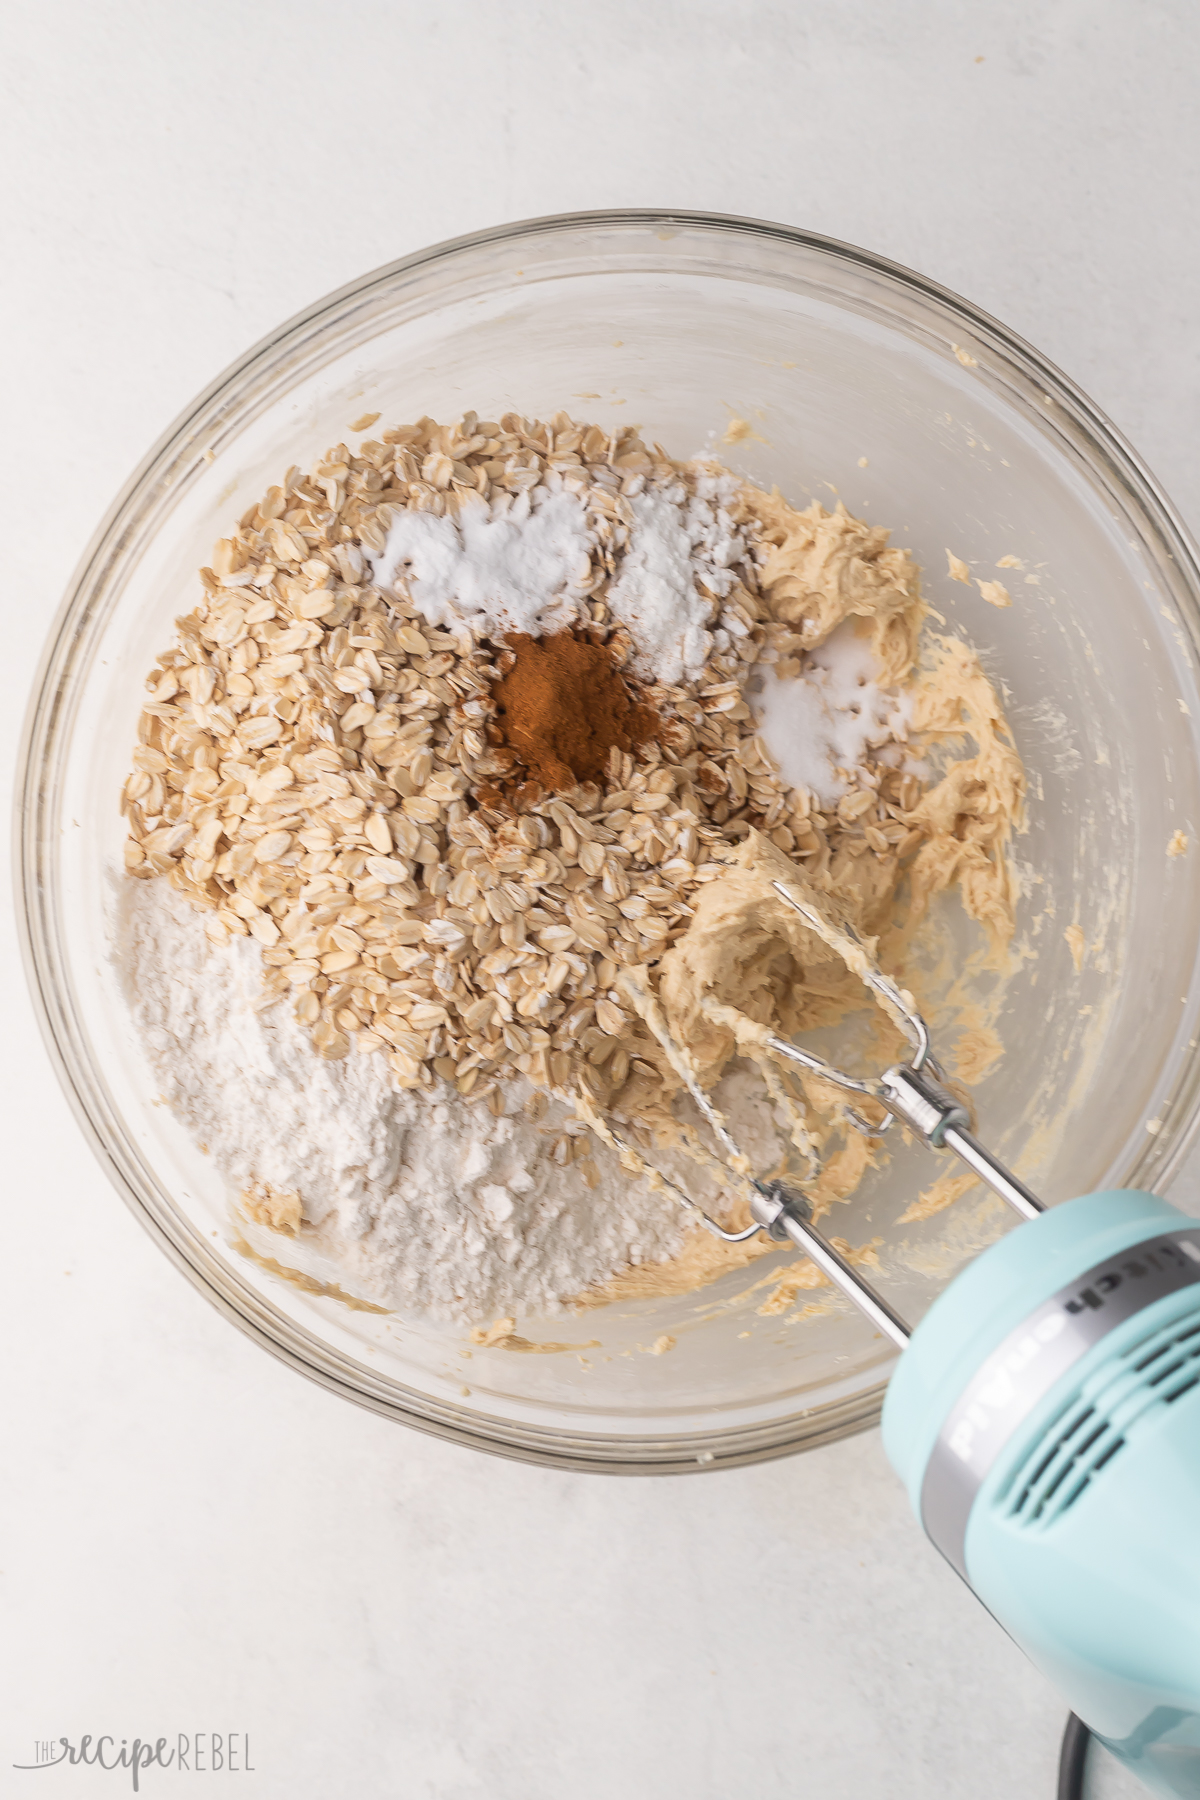 Top view of a glass mixing bowl with dry ingredients being mixed into a creamed mixture